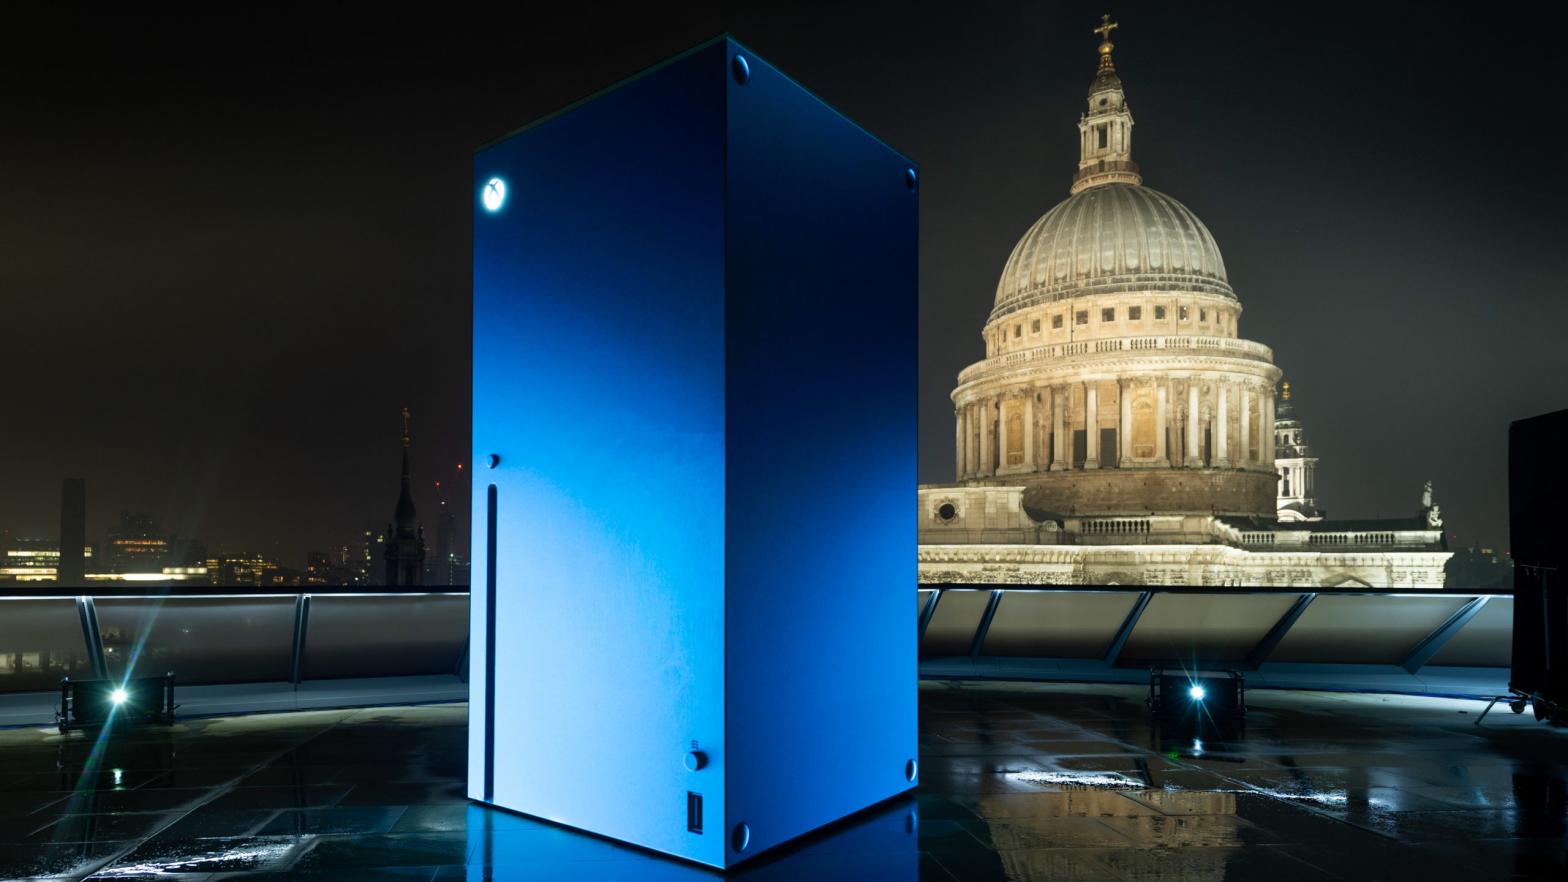 Xbox launches the Xbox Series X in the UK with a holographic installation on November 7, 2020, in London. (Photo: Ian Gavan, Getty Images)